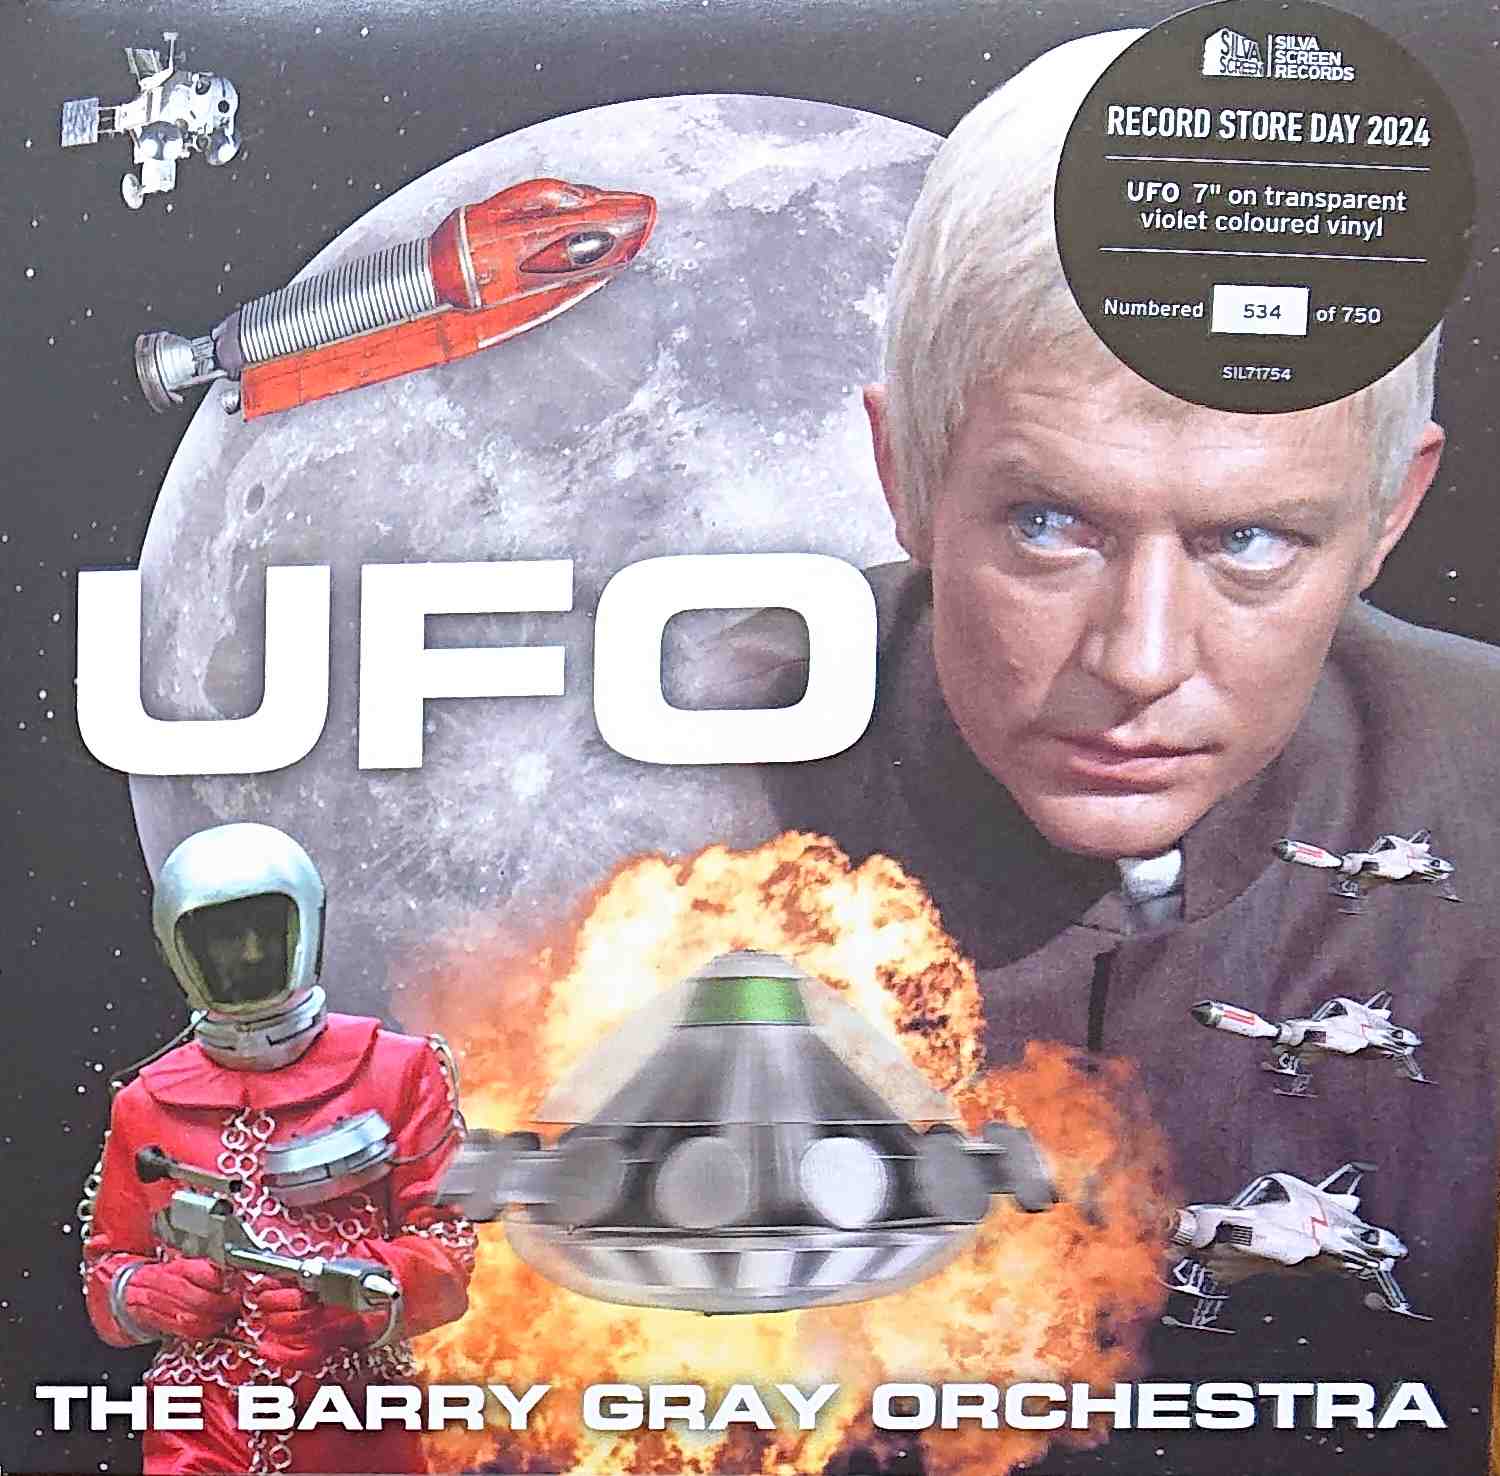 Picture of UFO by artist The Barry Gray Orchestra from ITV, Channel 4 and Channel 5 singles library